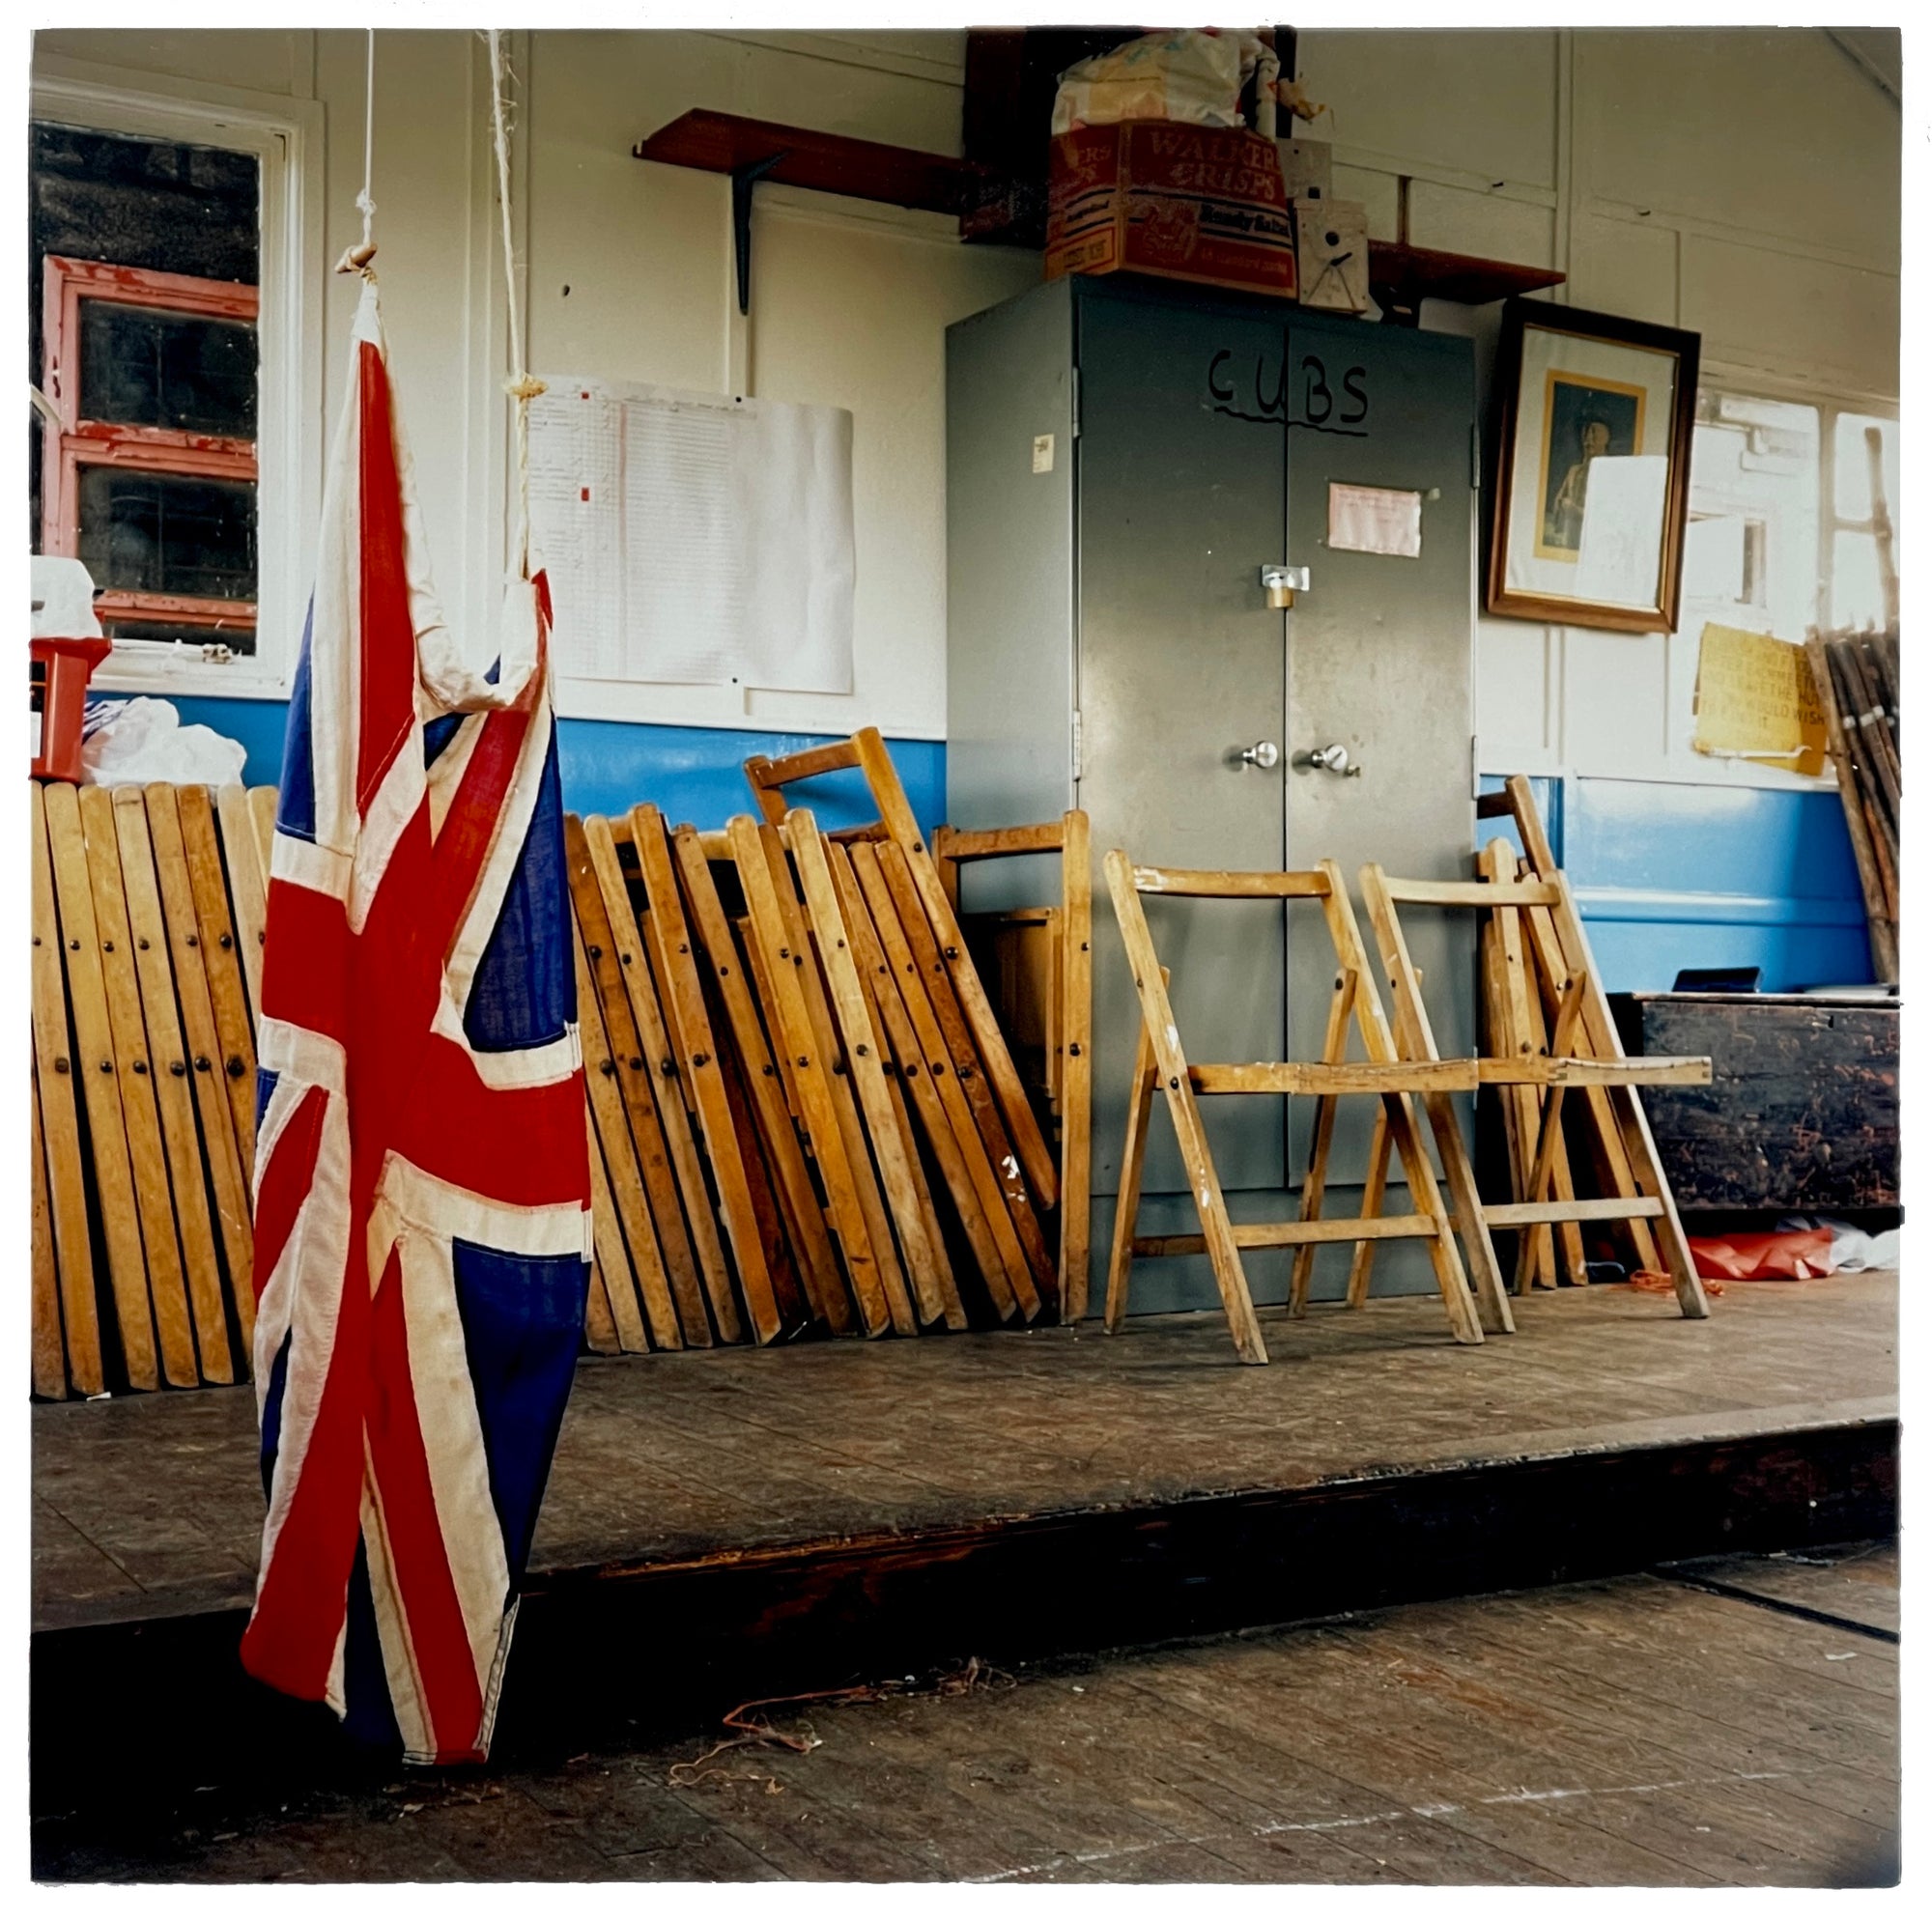 Photograph by Richard Heeps.  Inside a Cub Scout Hut, with the Union Jack Flag hanging and touching the floor.  The back half of the photo has a wooden platform with folding chairs on and the cubs own metal container.